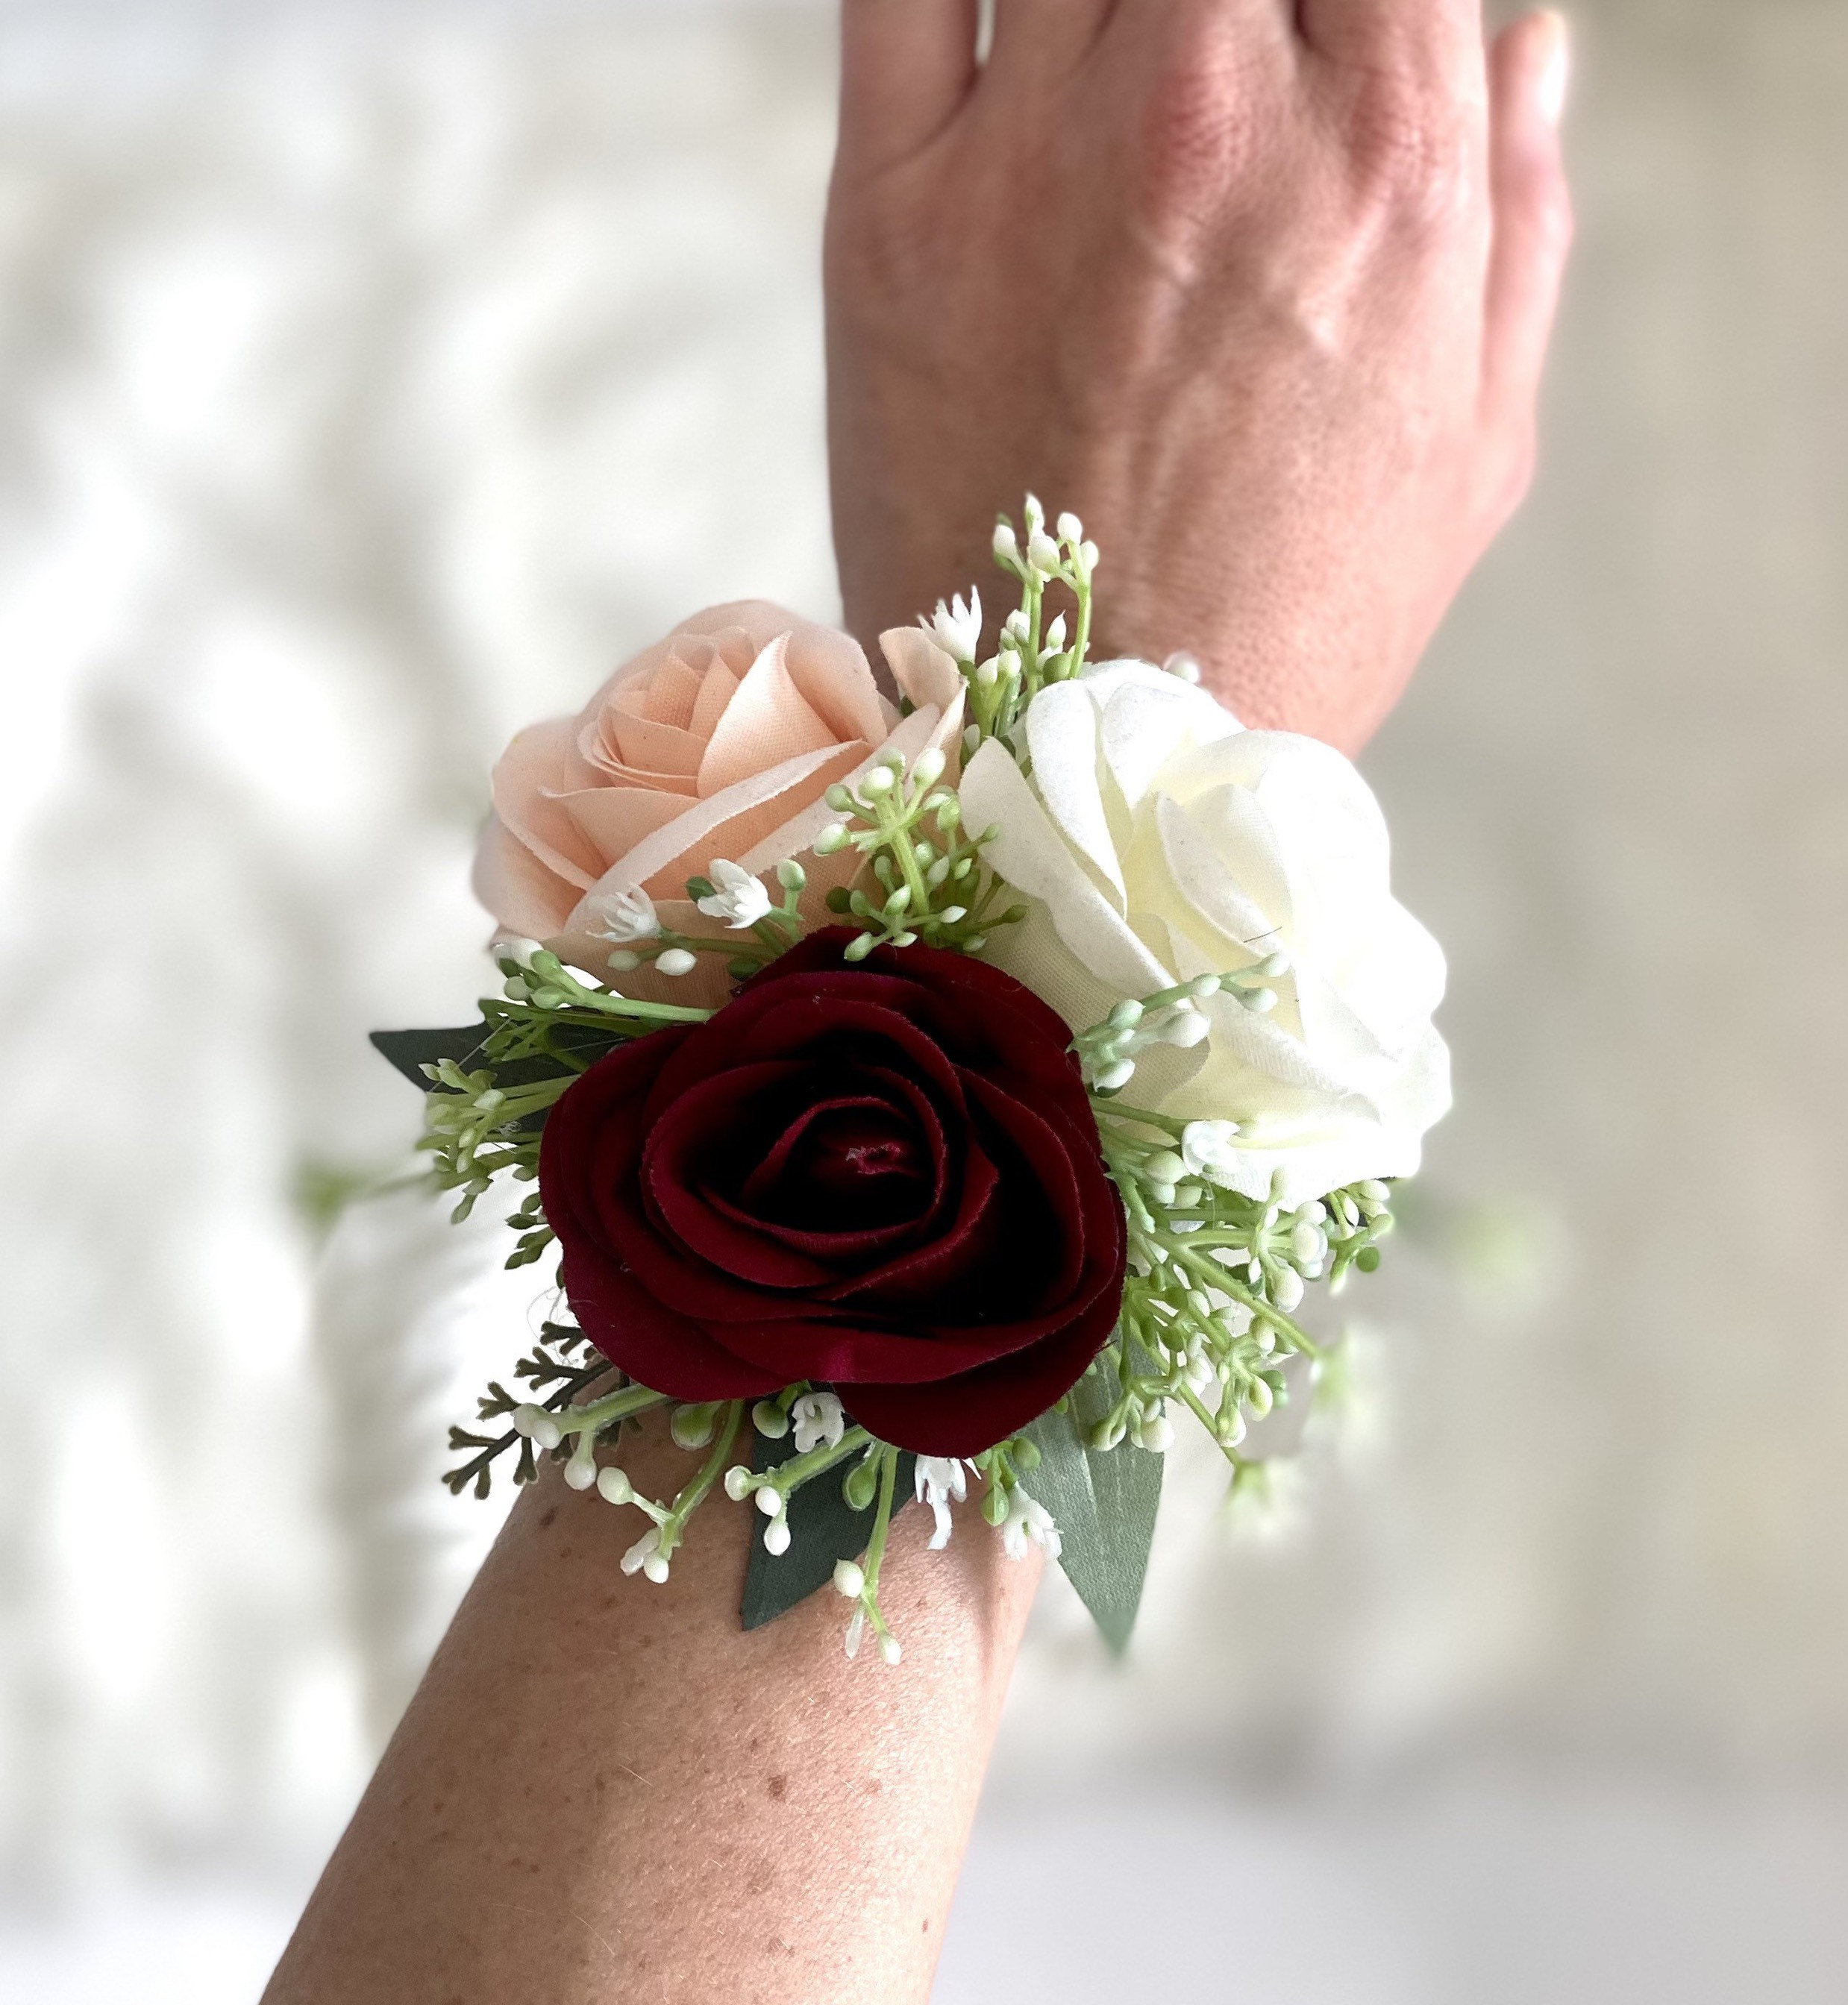 Fall daisy wrist corsage with burgundy roses corsage Burgundy and burlap wrist corsage orange wrist corsage burgundy rose wrist corsage